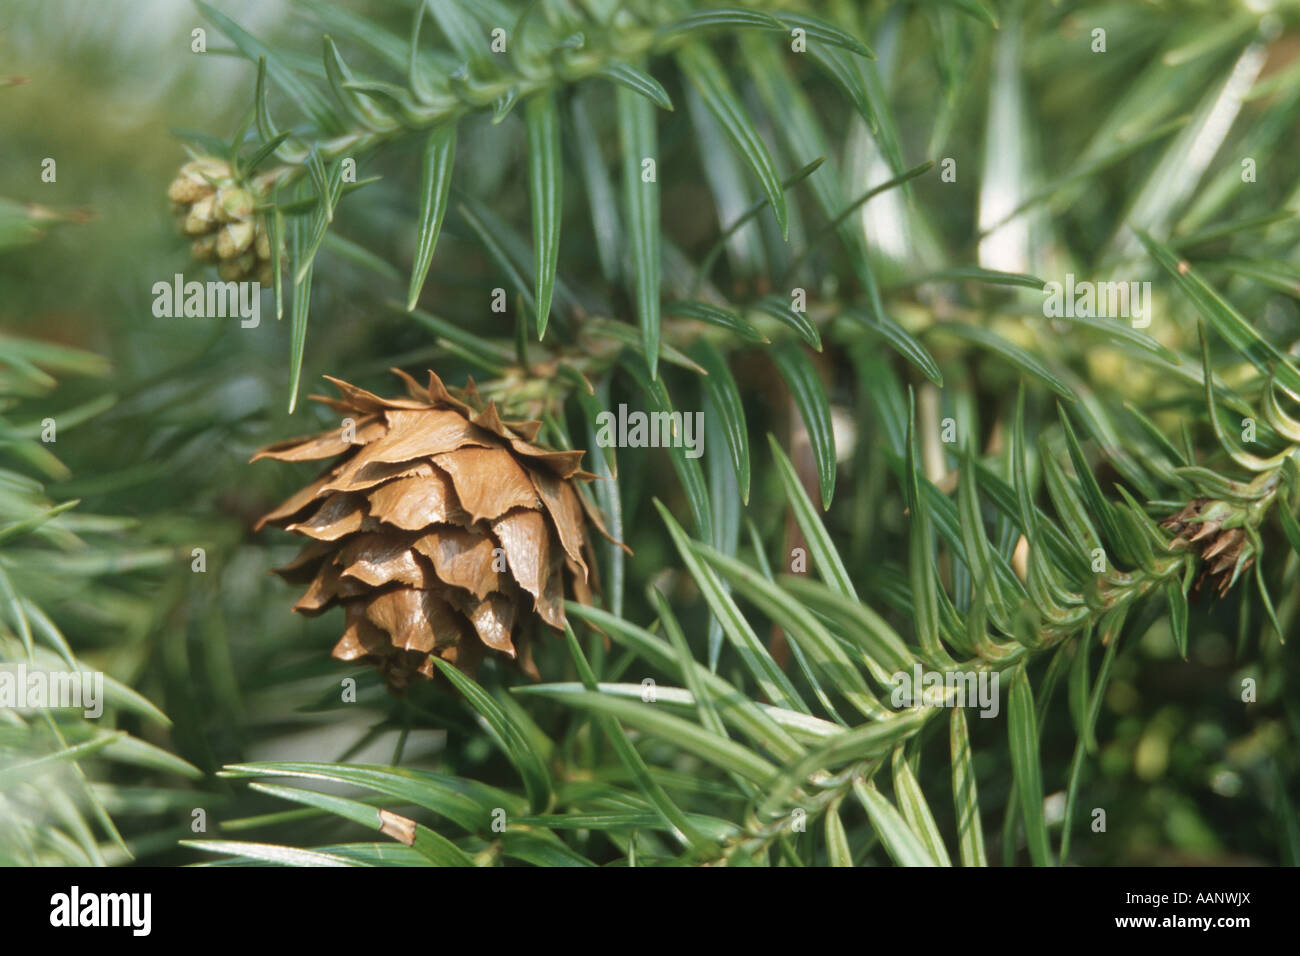 China fir, Chinese fir (Cunninghamia lanceolata), cone and leaves Stock Photo